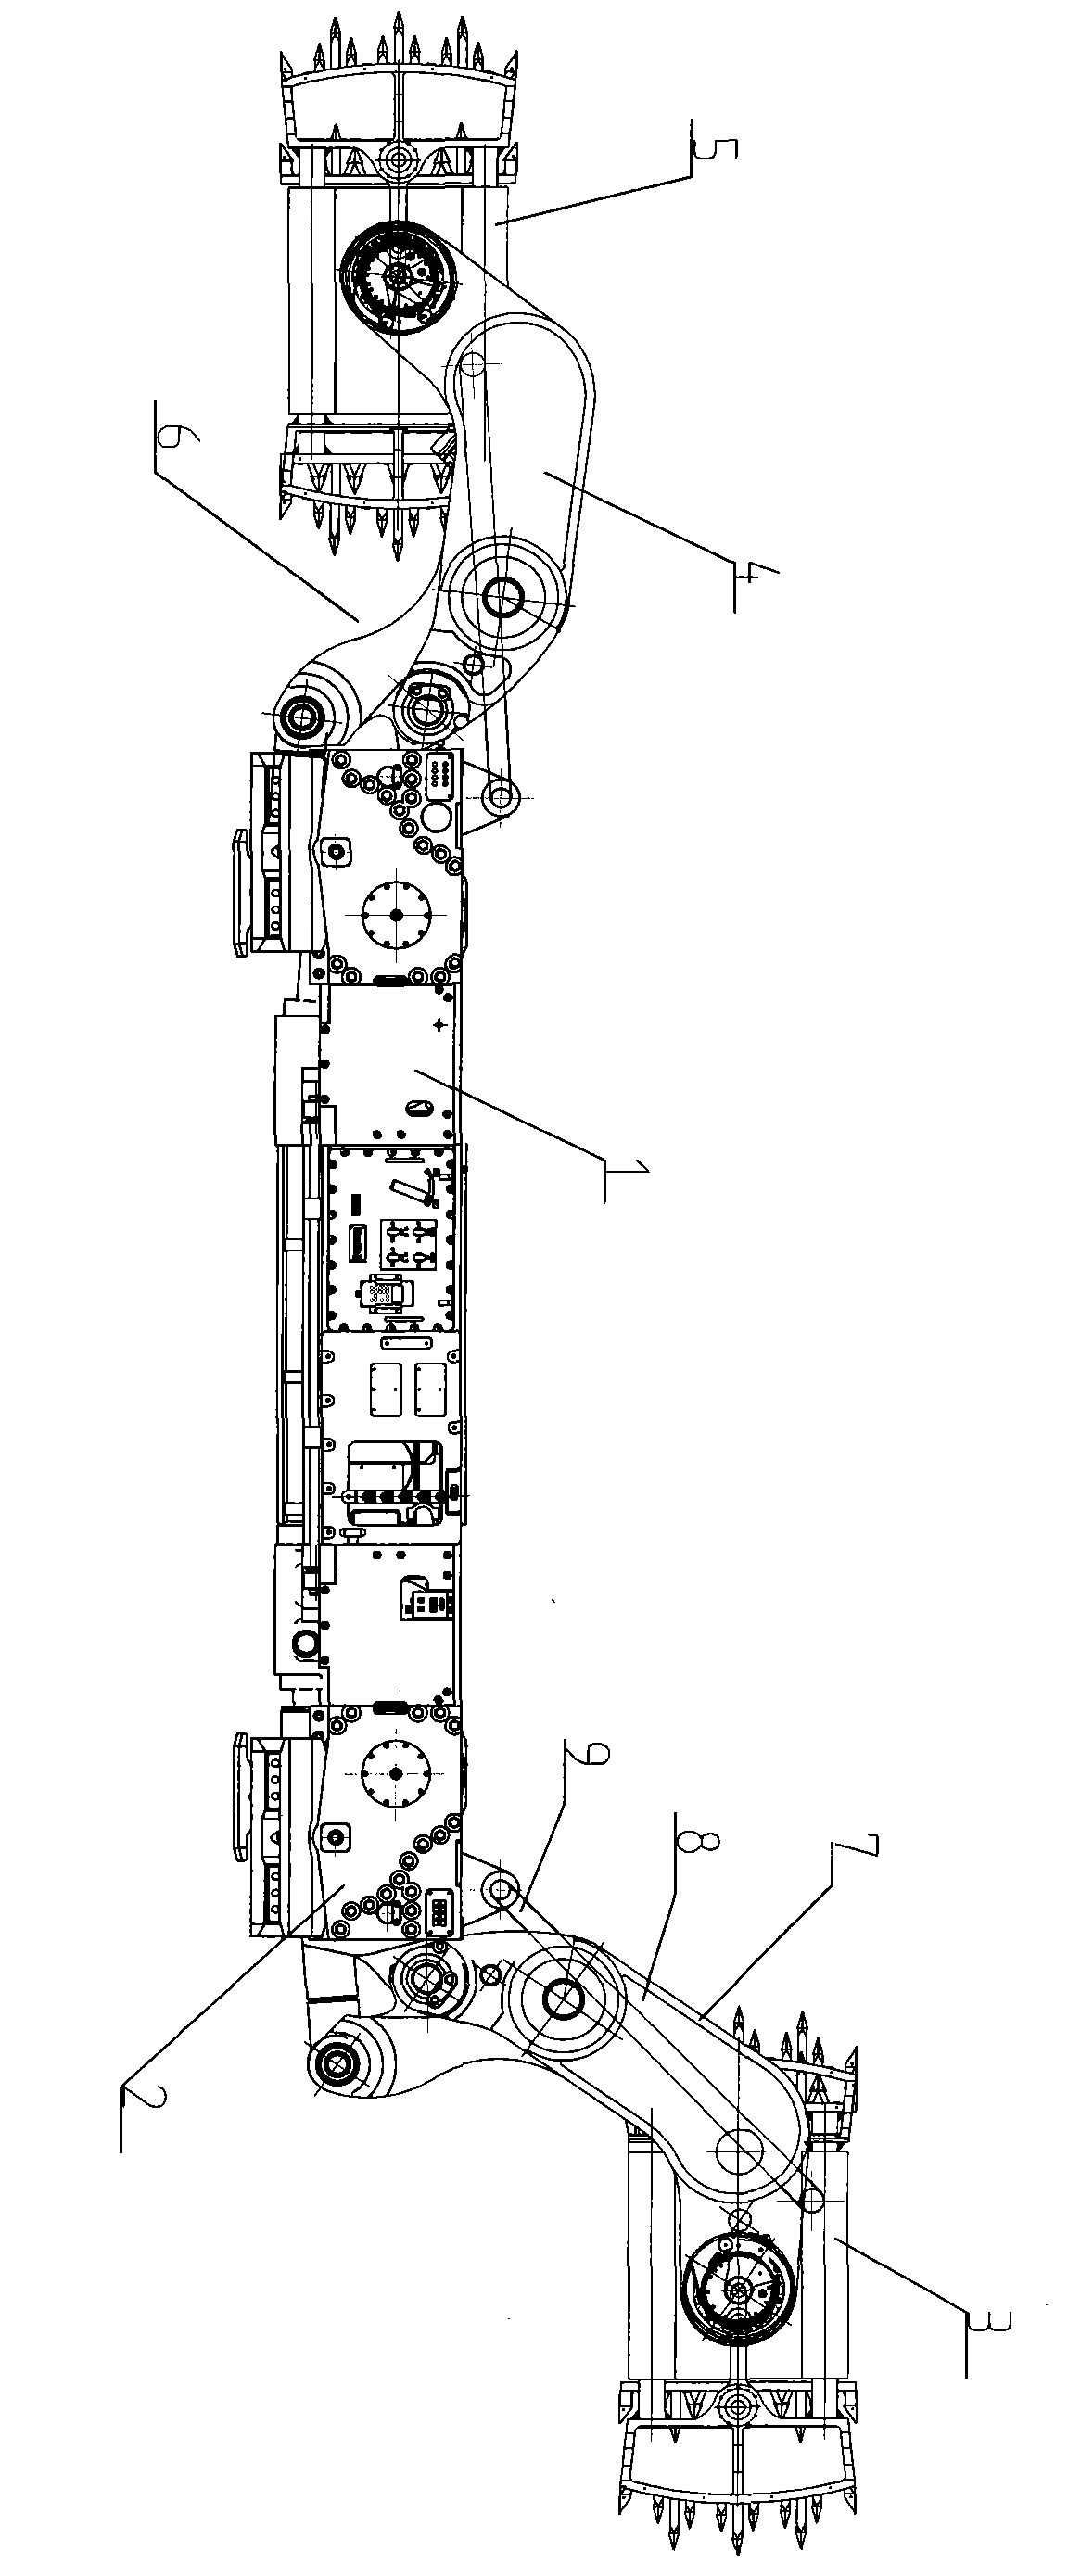 Mining machine with rocker arm provided with coal-passing space